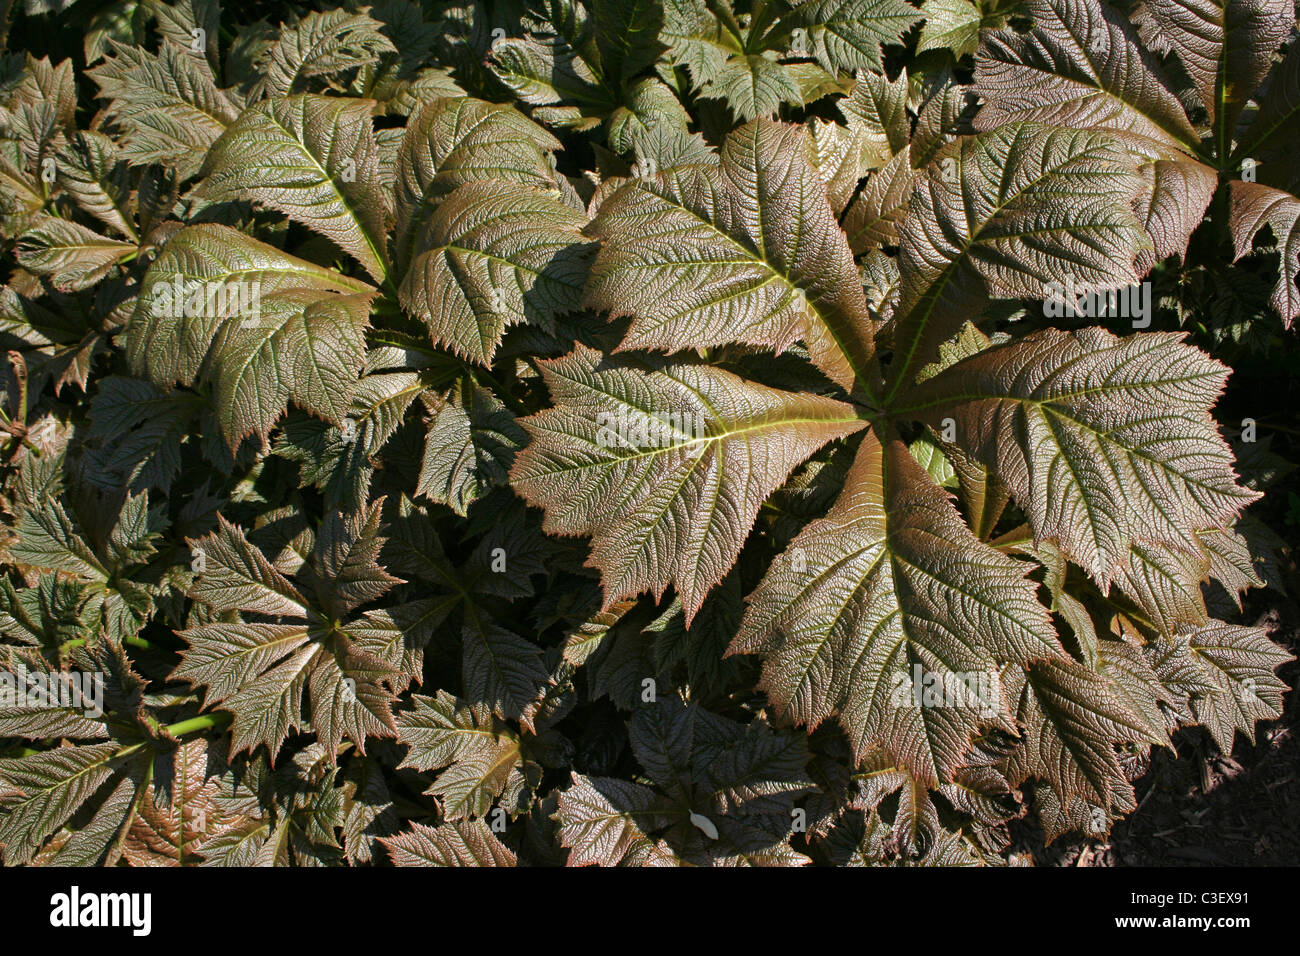 Large Brown Leaves Of An Architectural Garden Plant Stock Photo